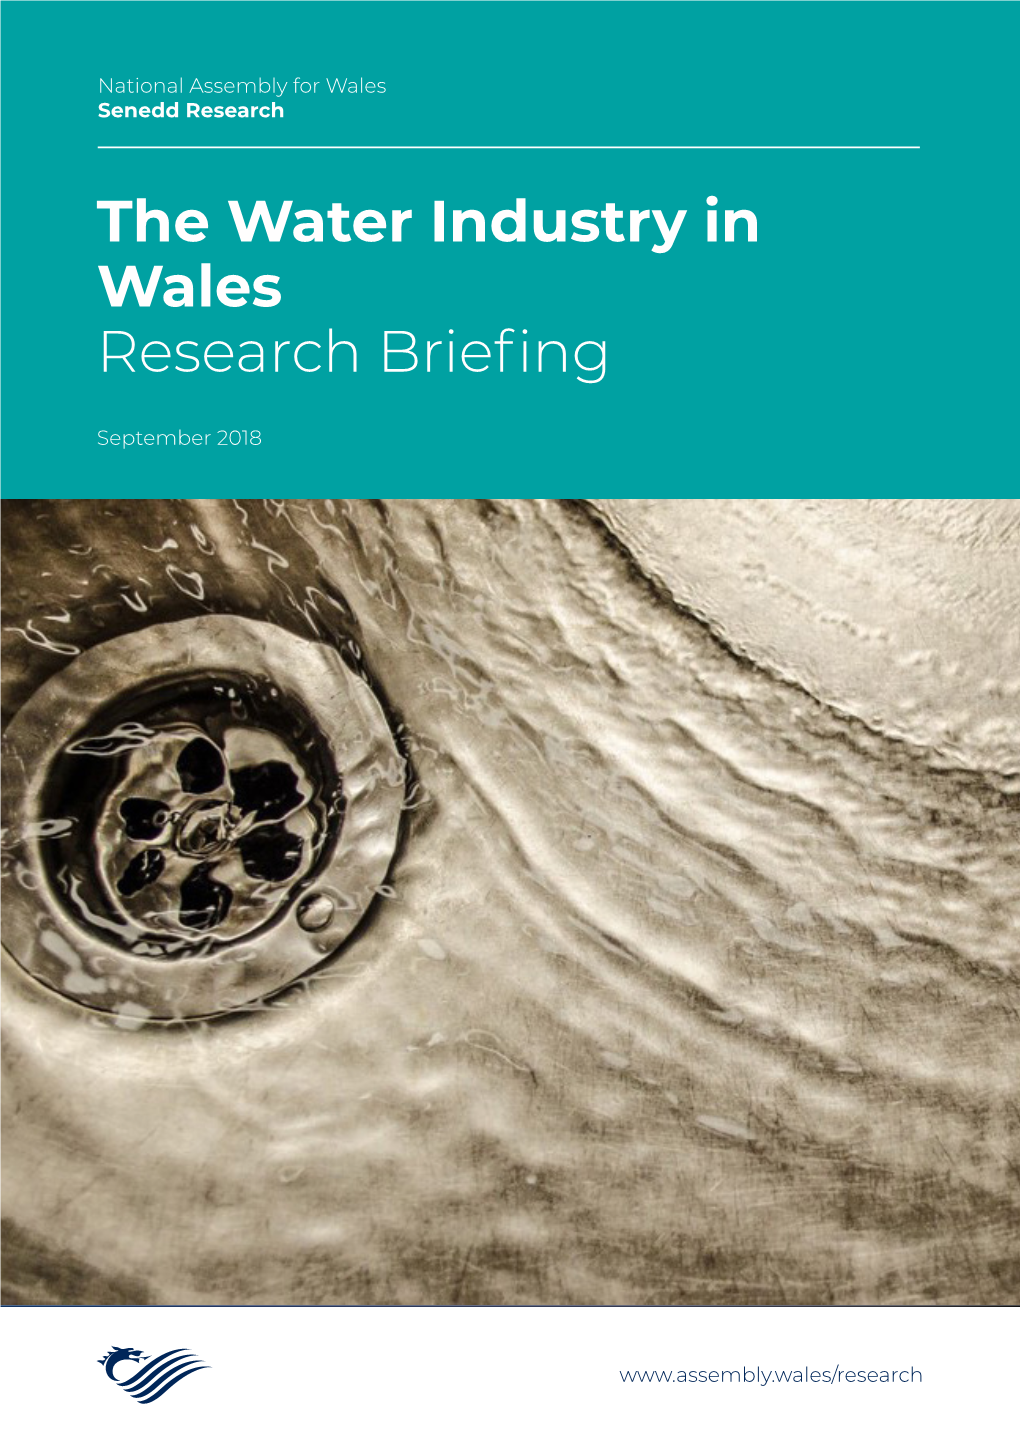 The Water Industry in Wales Research Briefing